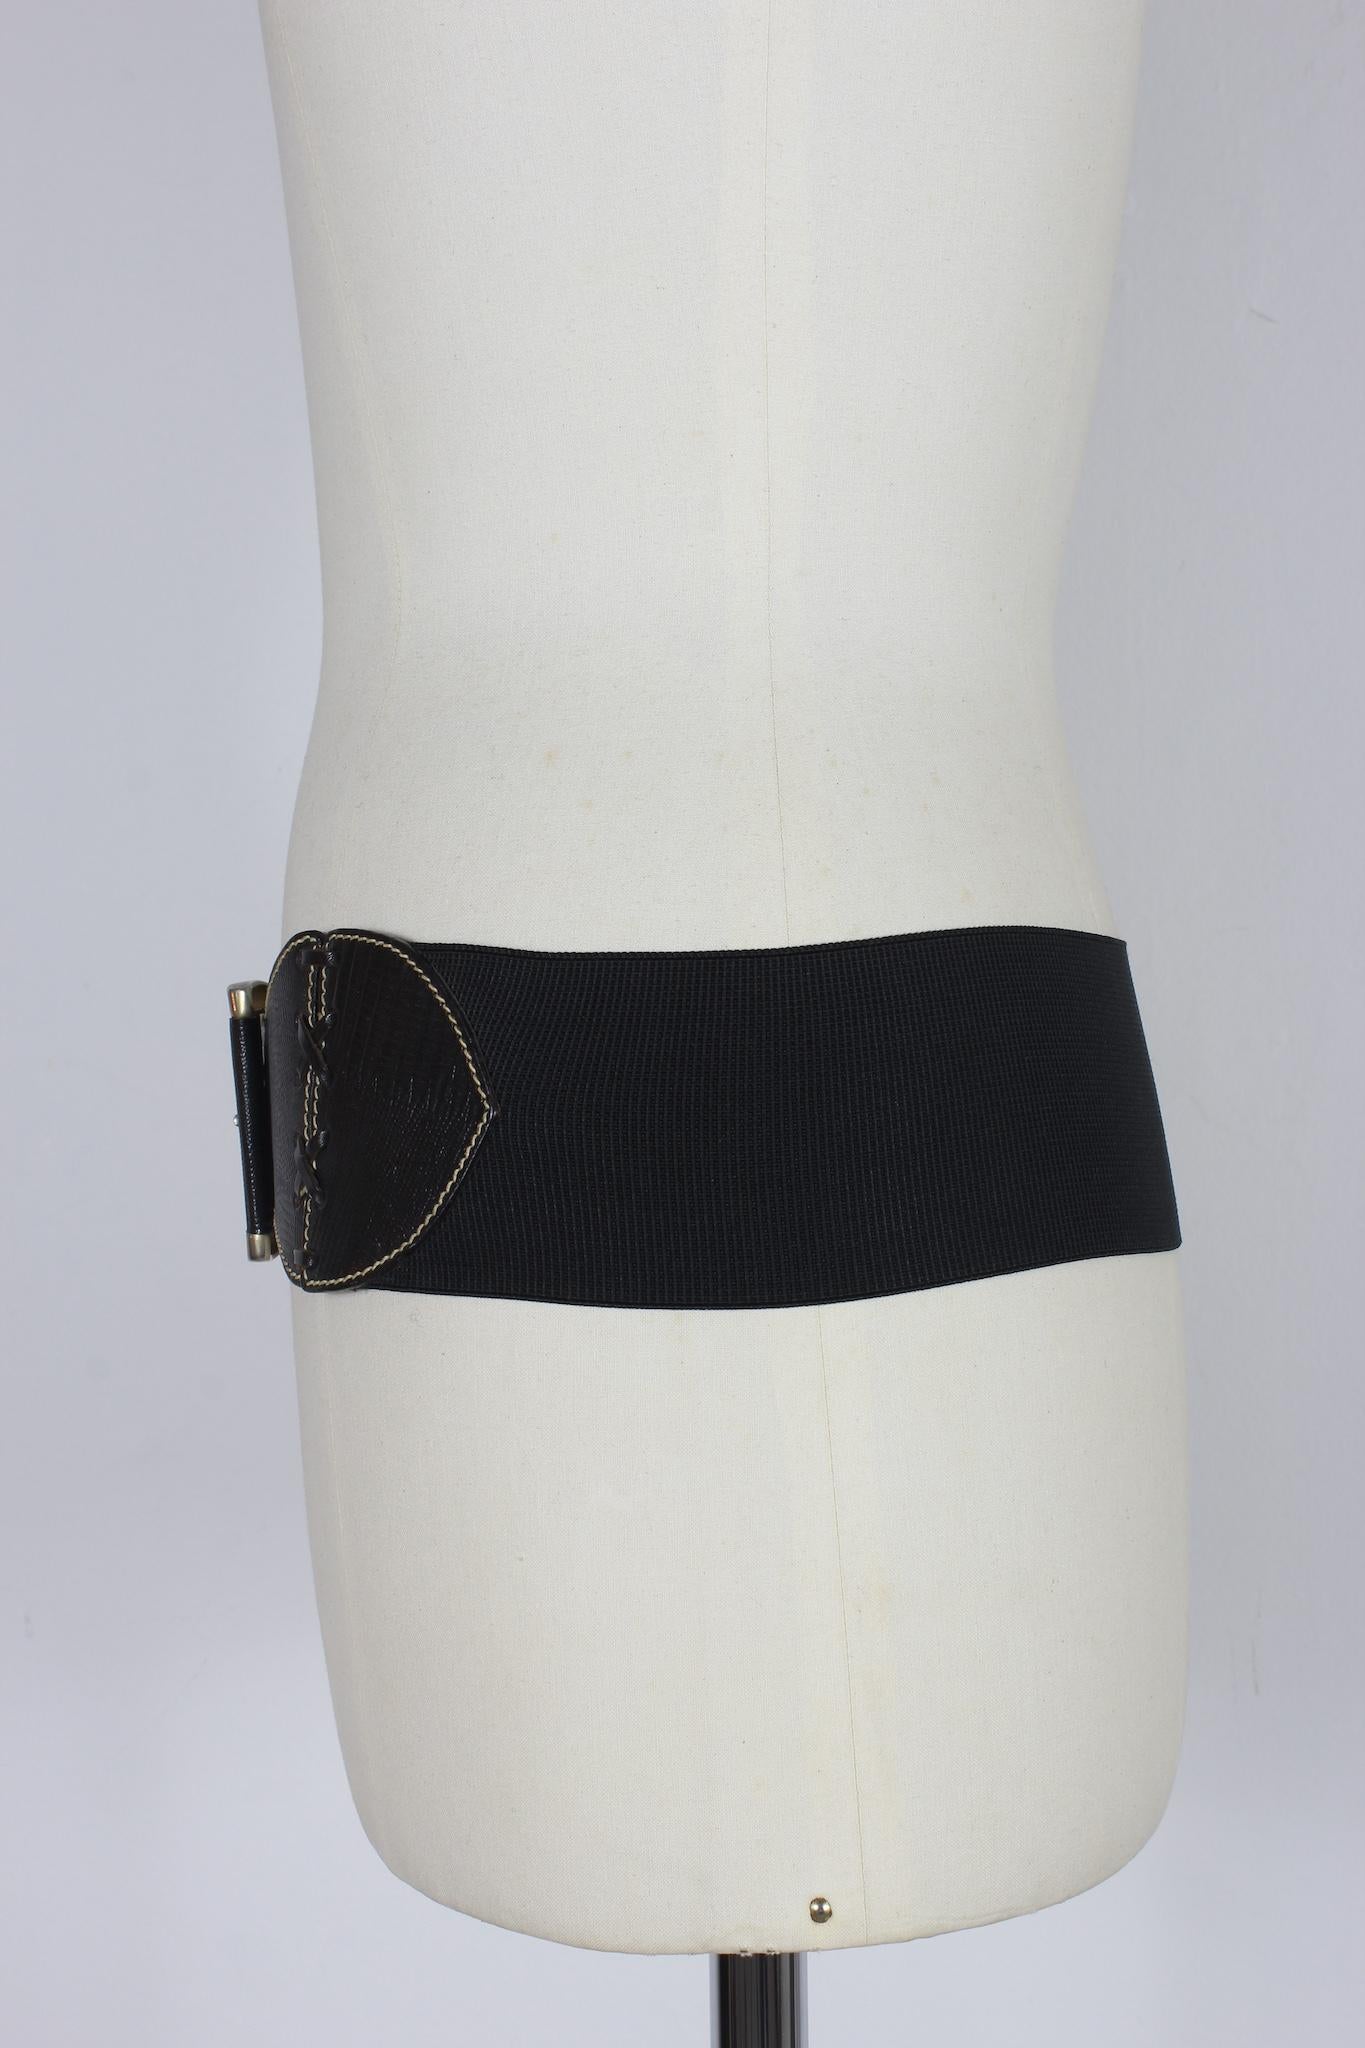 Gianfranco Ferrè Black Leather Elastic Belt Vintage 90s In Excellent Condition For Sale In Brindisi, Bt